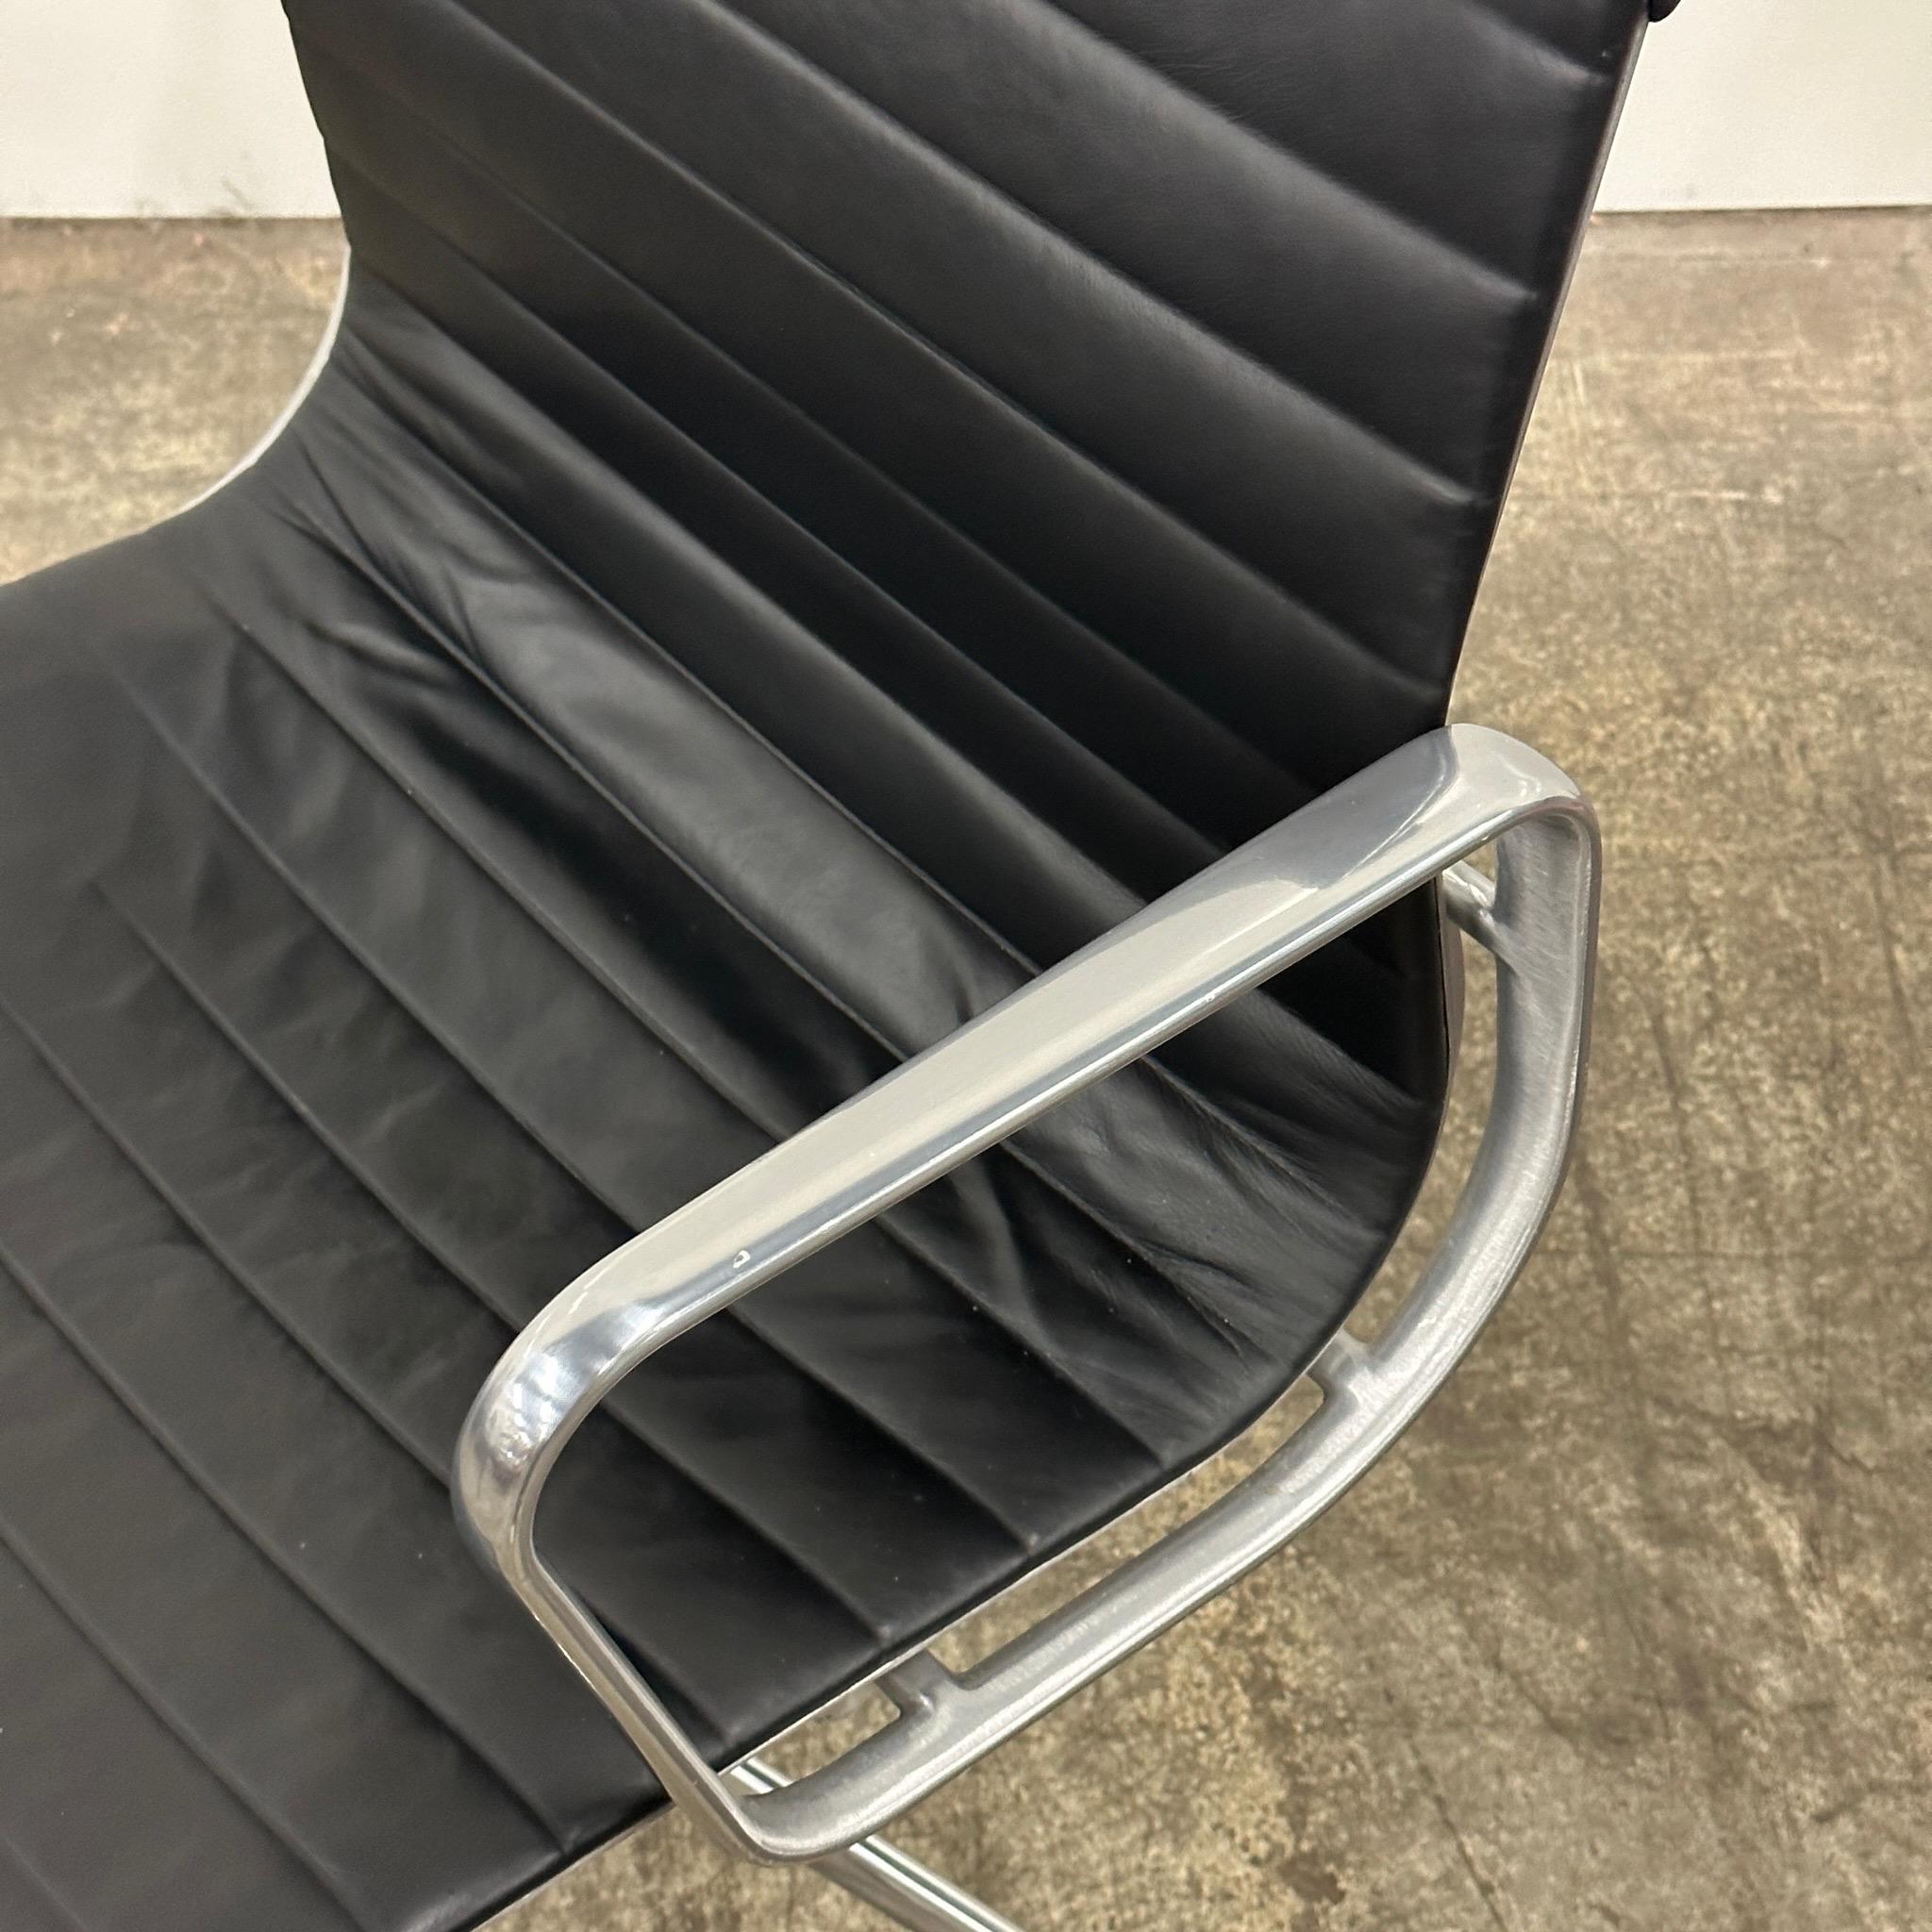 c. 2010s. Leather seat with aluminum group base and caster. Note- piece is missing on bottom so when lifted the chair comes off base. Does not affect function. 